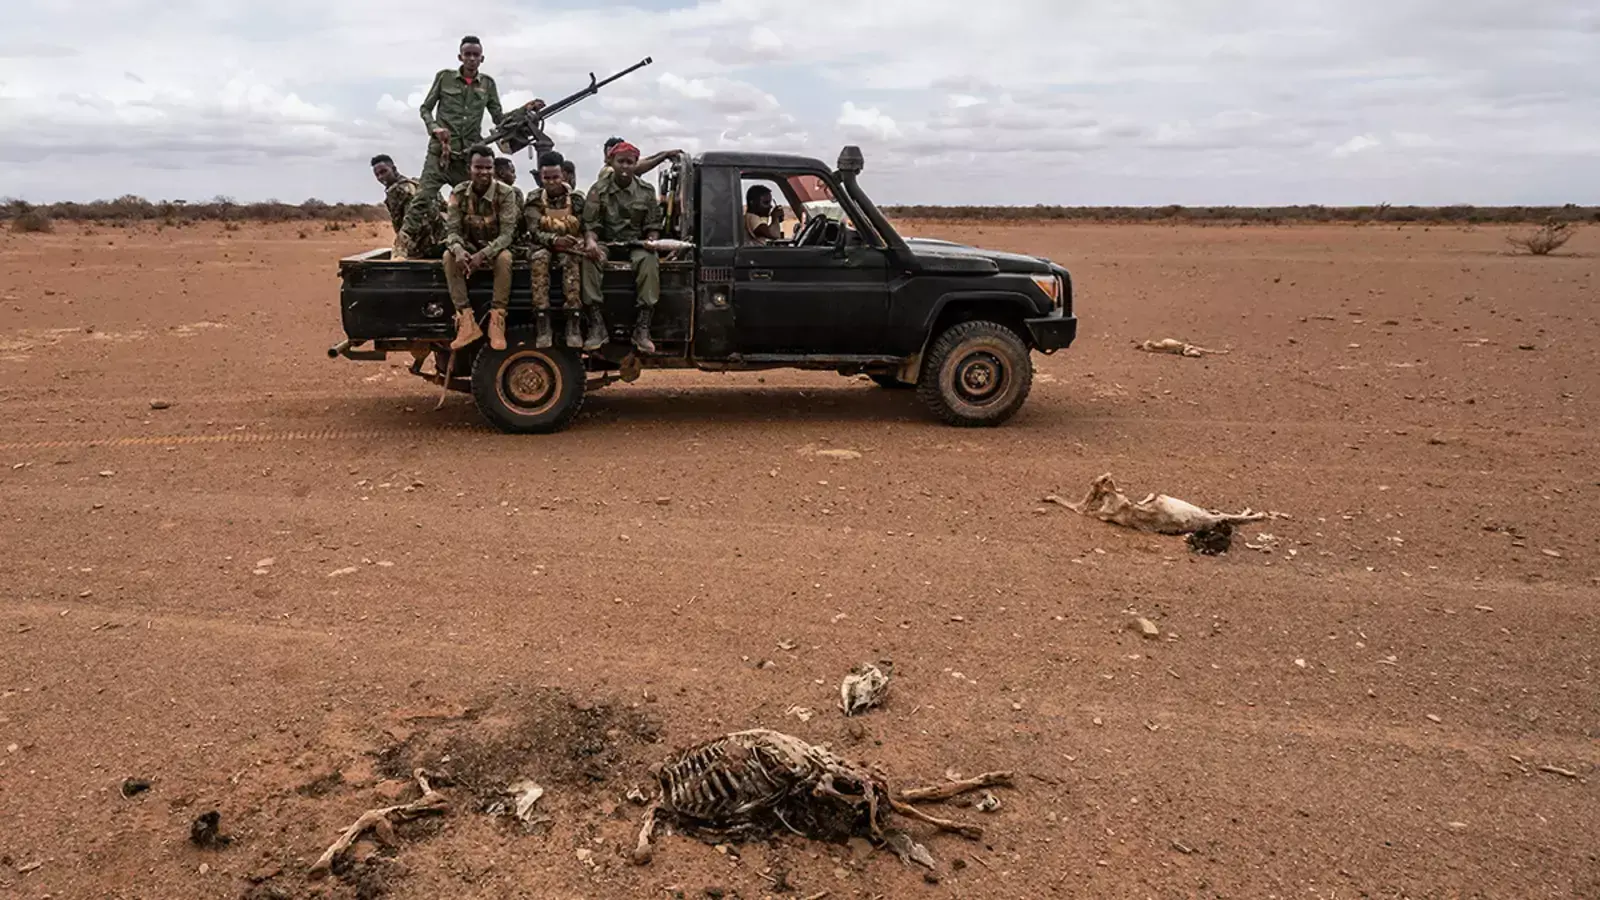 Somali National Army soldiers pass by a group of goat carcasses formerly used for pasture by local herders in the Gedo region of South West Somalia.